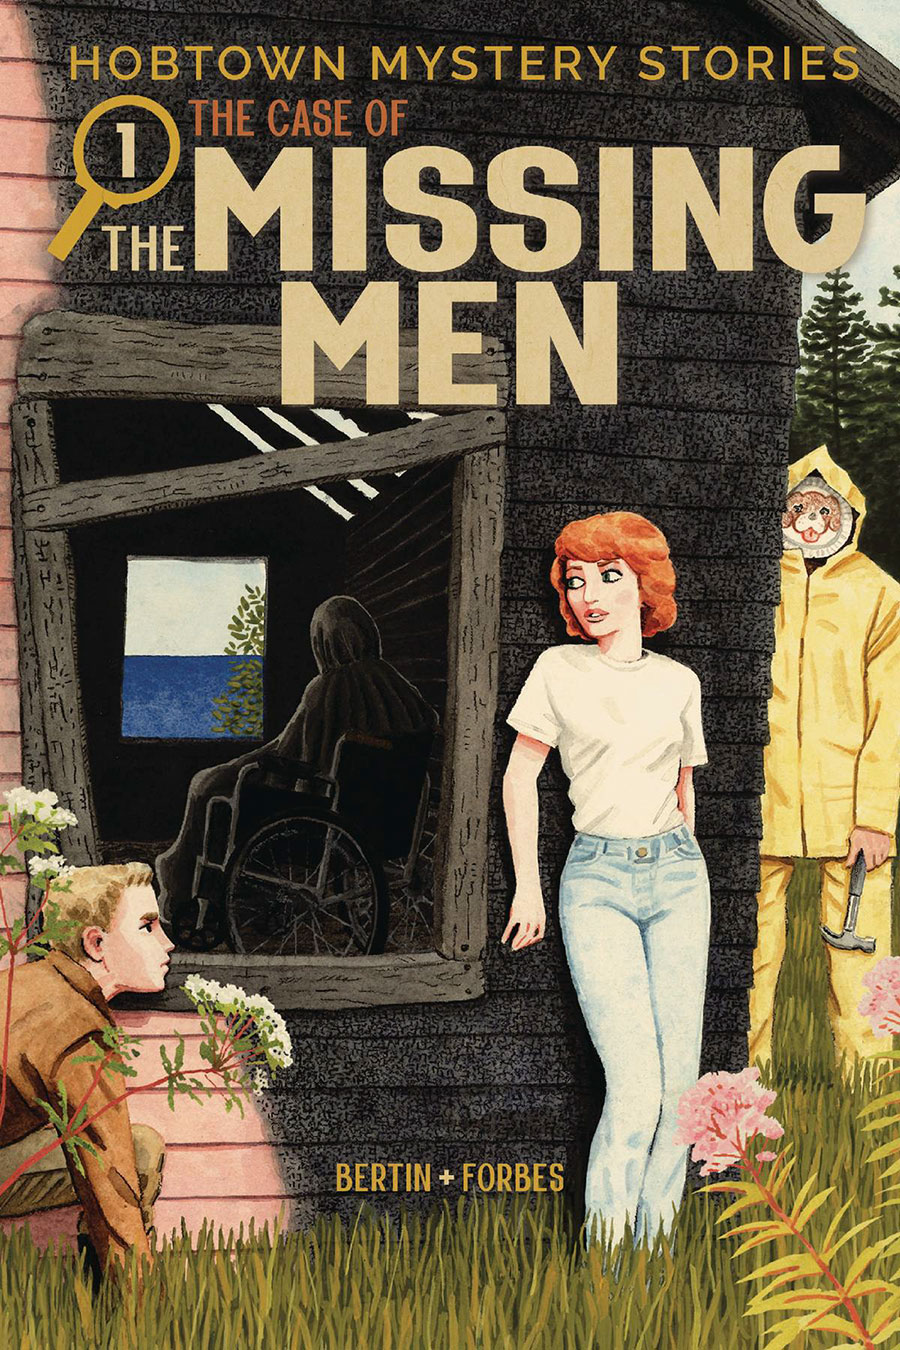 Hobtown Mystery Stories Vol 1 The Case Of The Missing Men TP